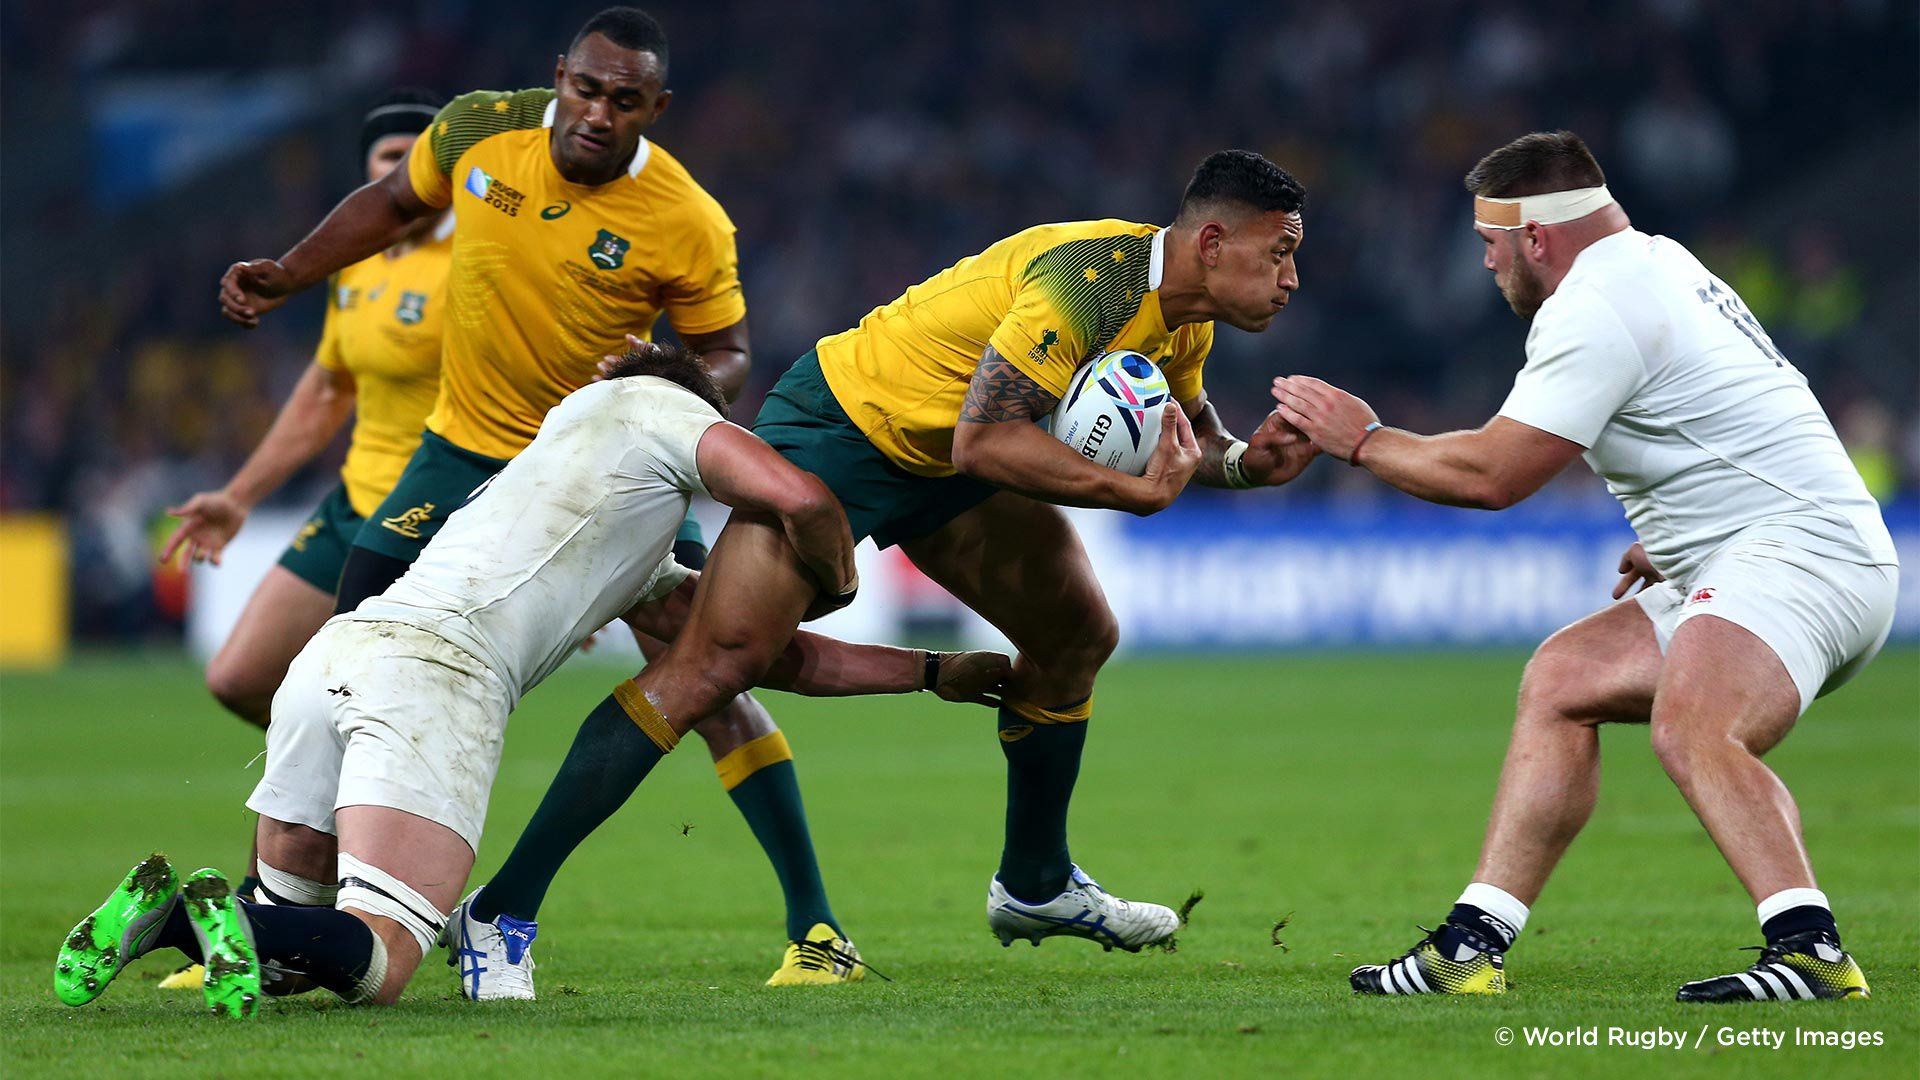 Players pictured on the point of a tackle in a match between England and Australia in the 2015 Rugby World Cup. Photo by Steve Bardens.